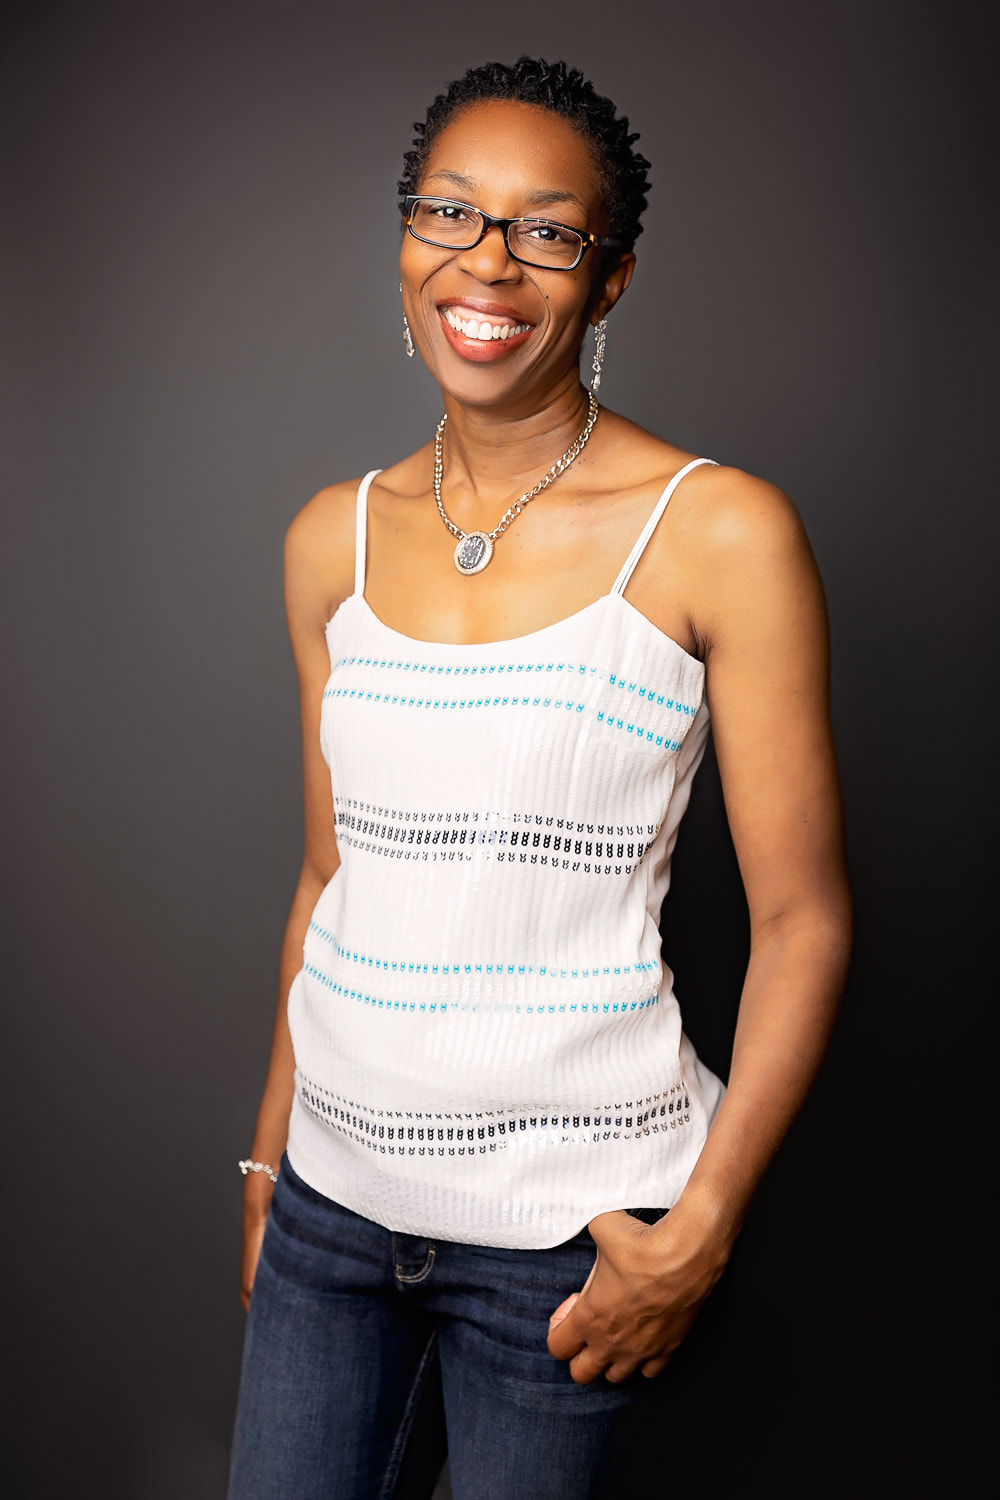 Tamieka Smith Photography is heading to Imaging USA the photography conference